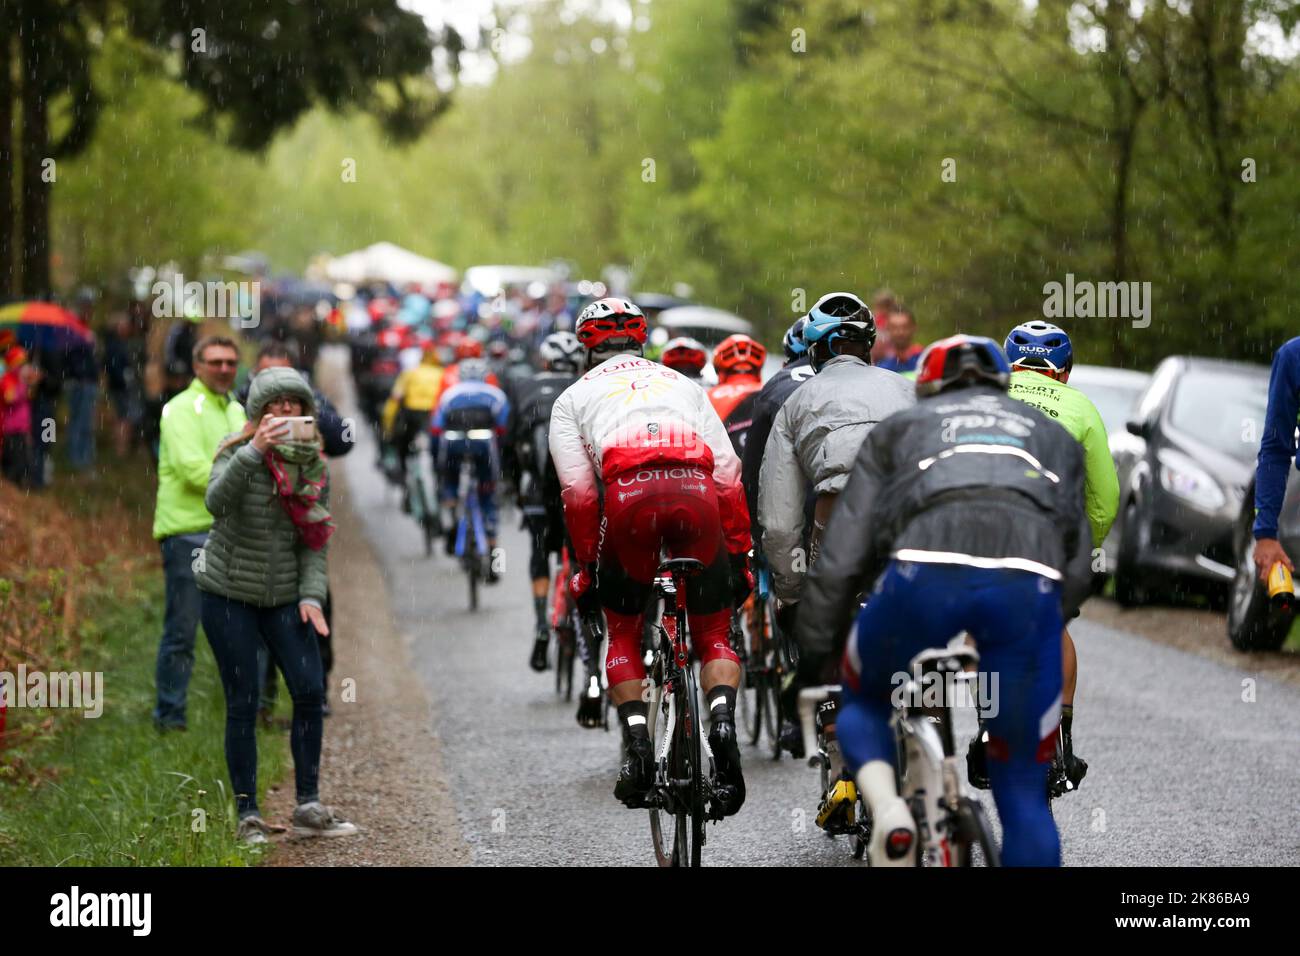 The climbs do their damage during the race as the back of the peloton stretches out Stock Photo